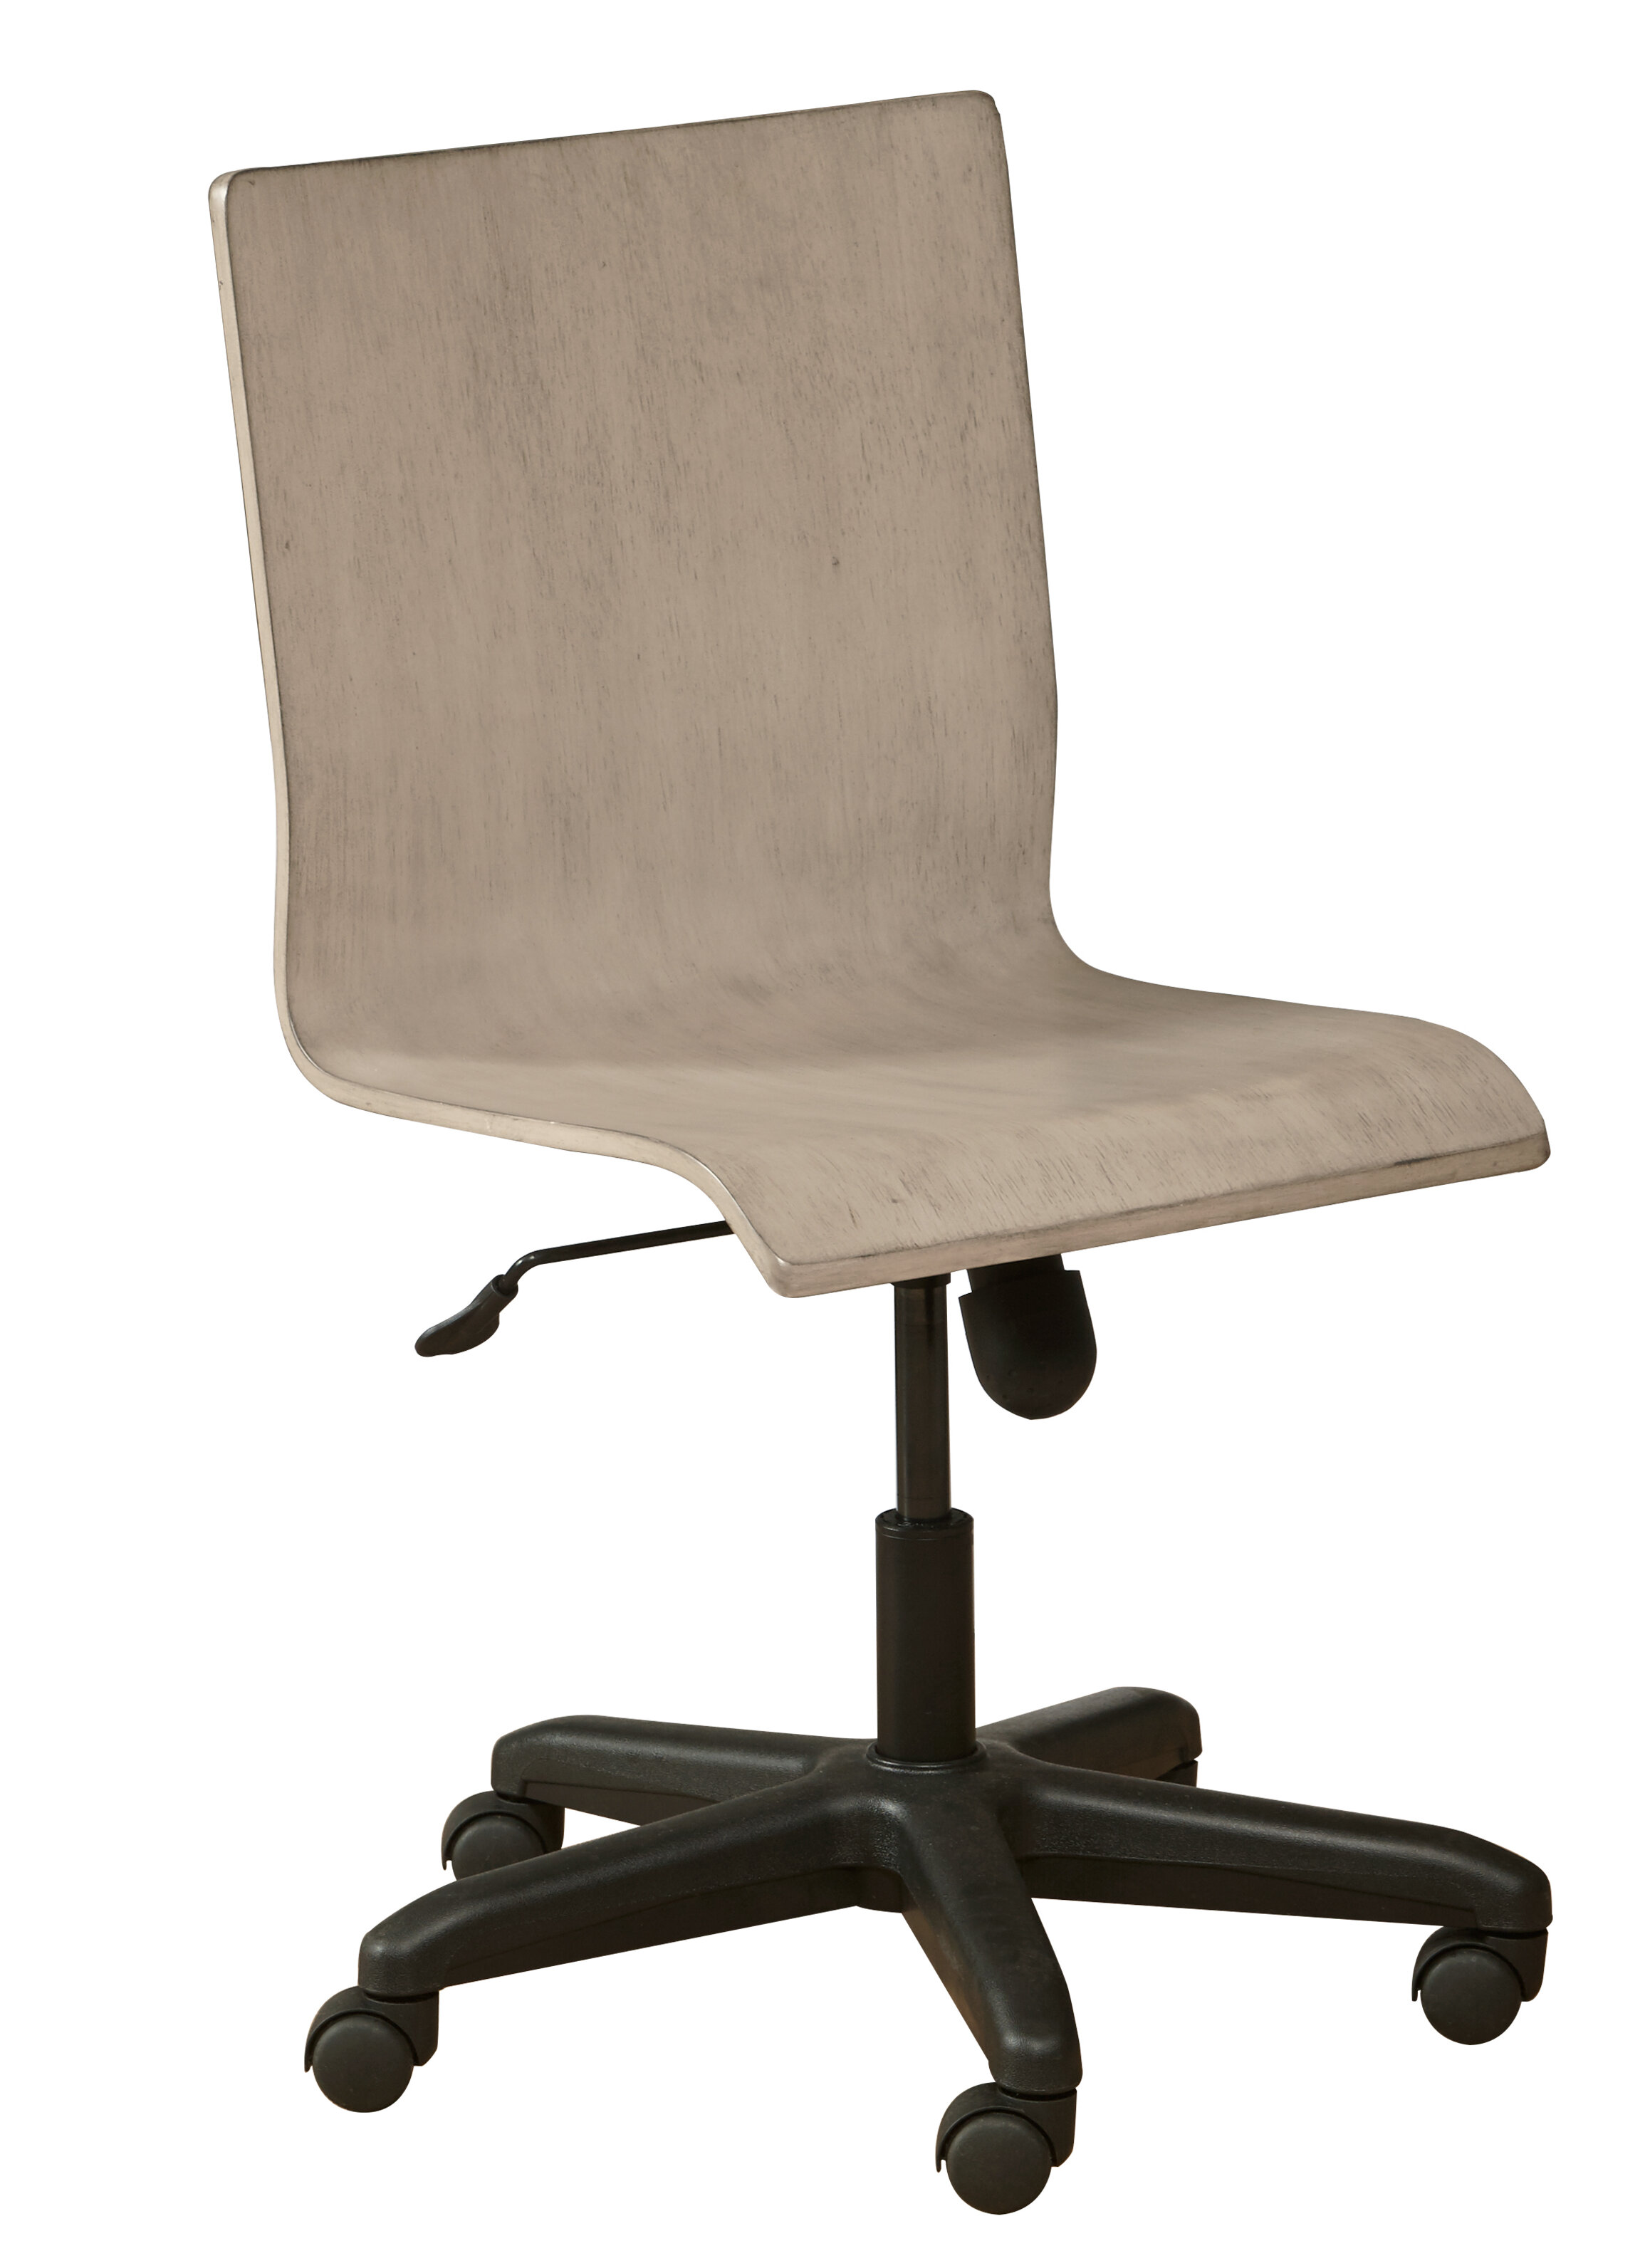 office chair for kids